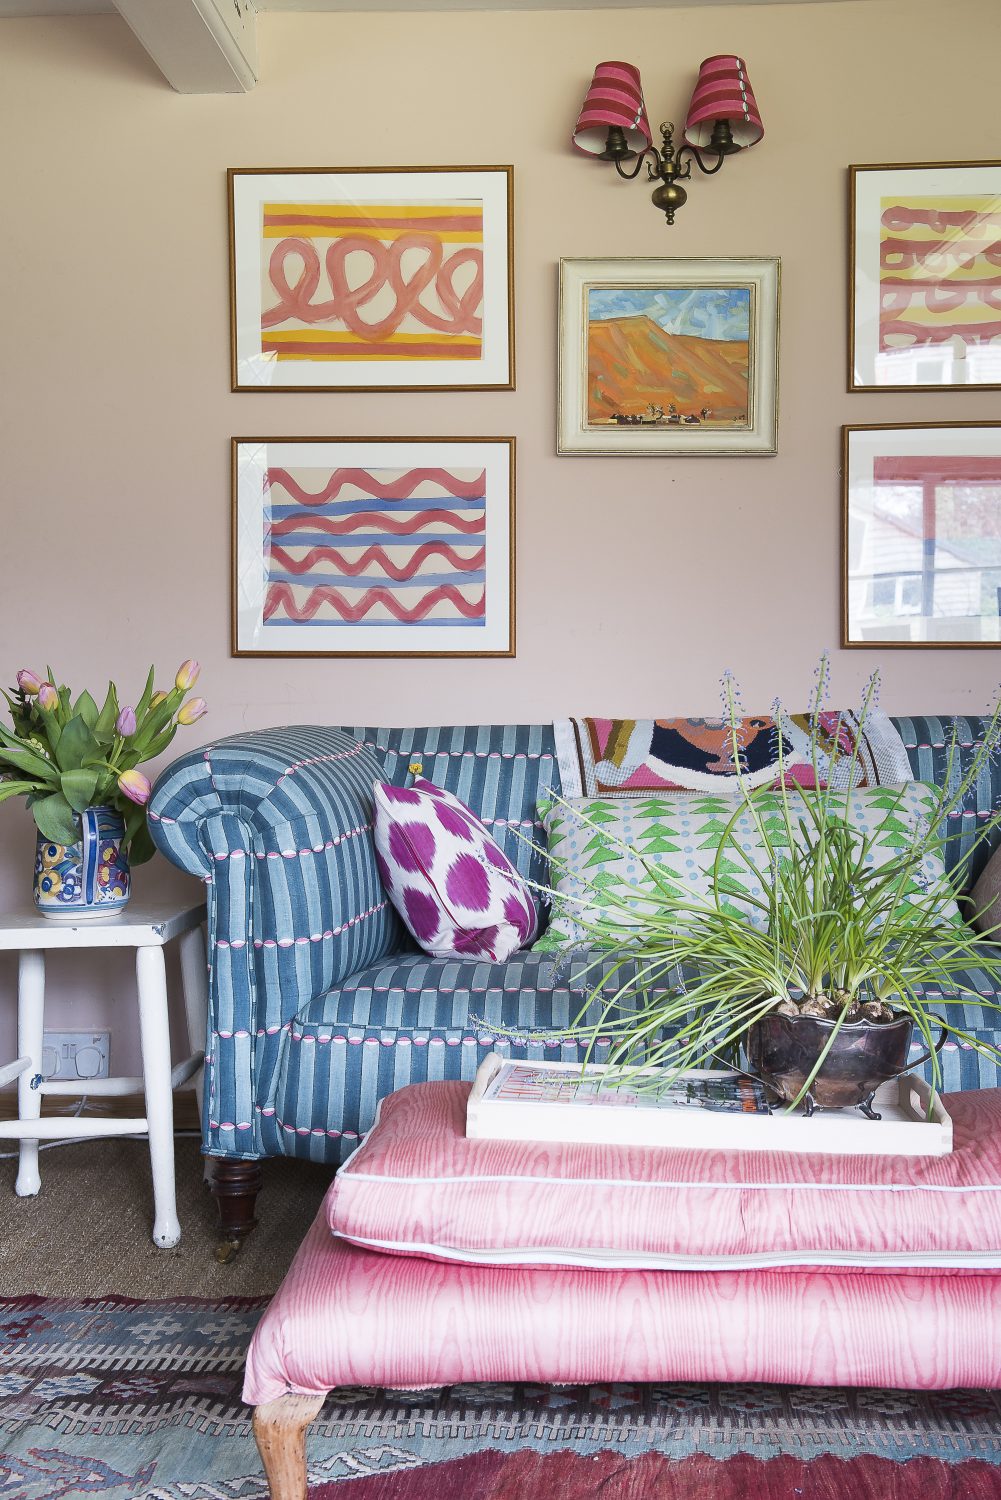 The sofa in the sitting room is covered in Molly’s award-winning Luna fabric